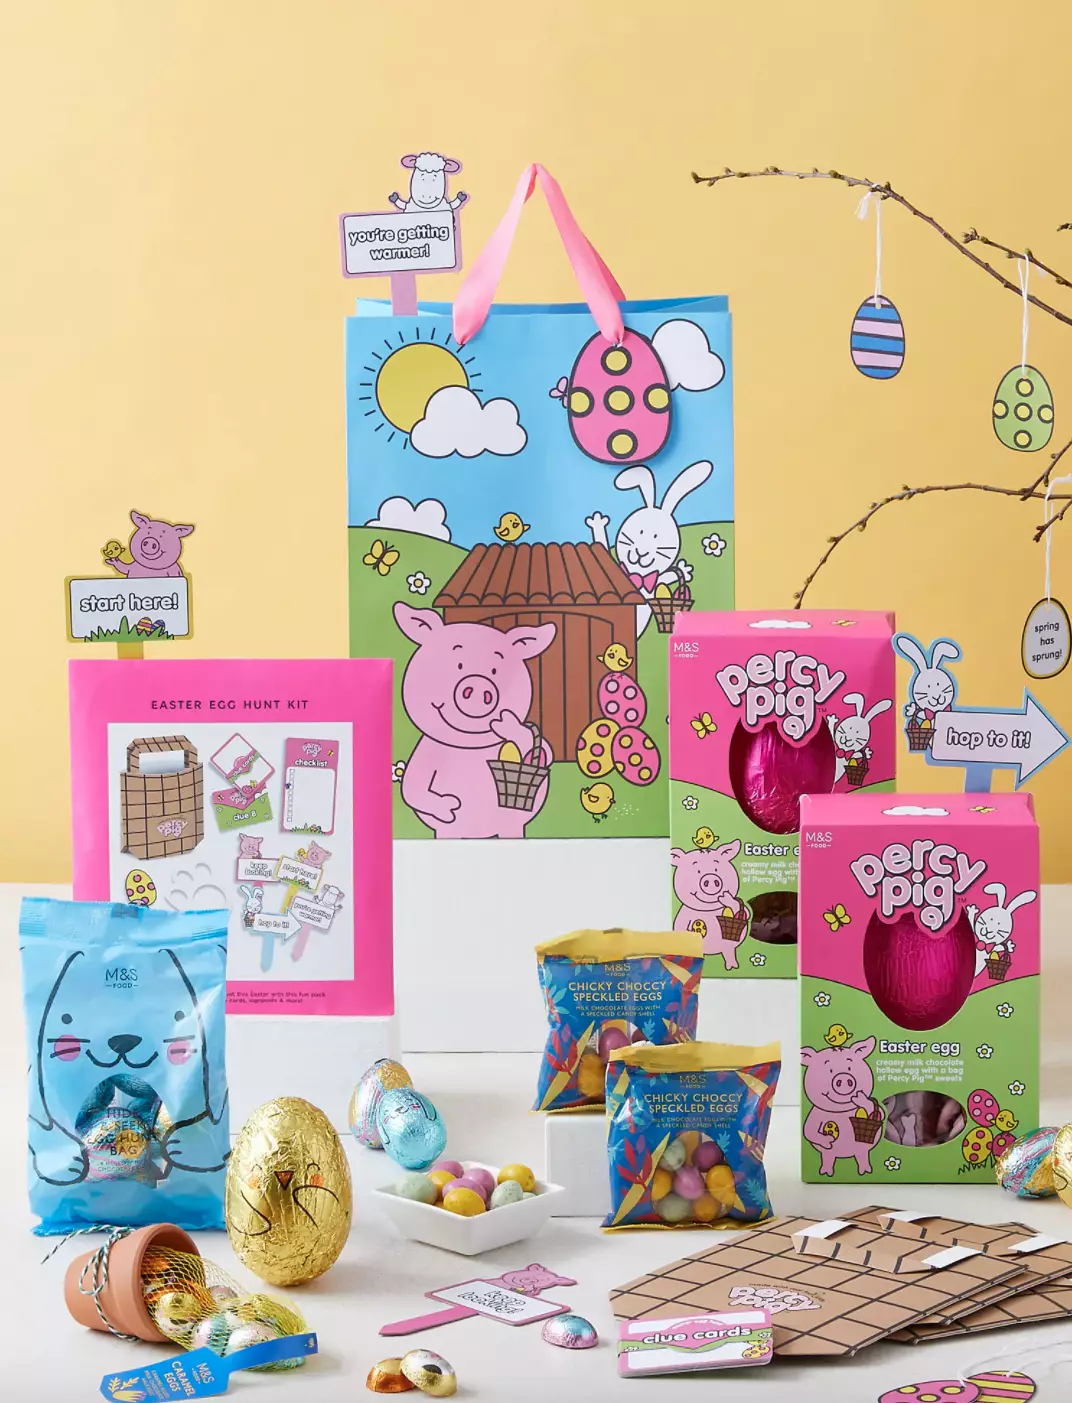 Marks and Spencer is selling a Percy Pig Easter egg hunt kit (